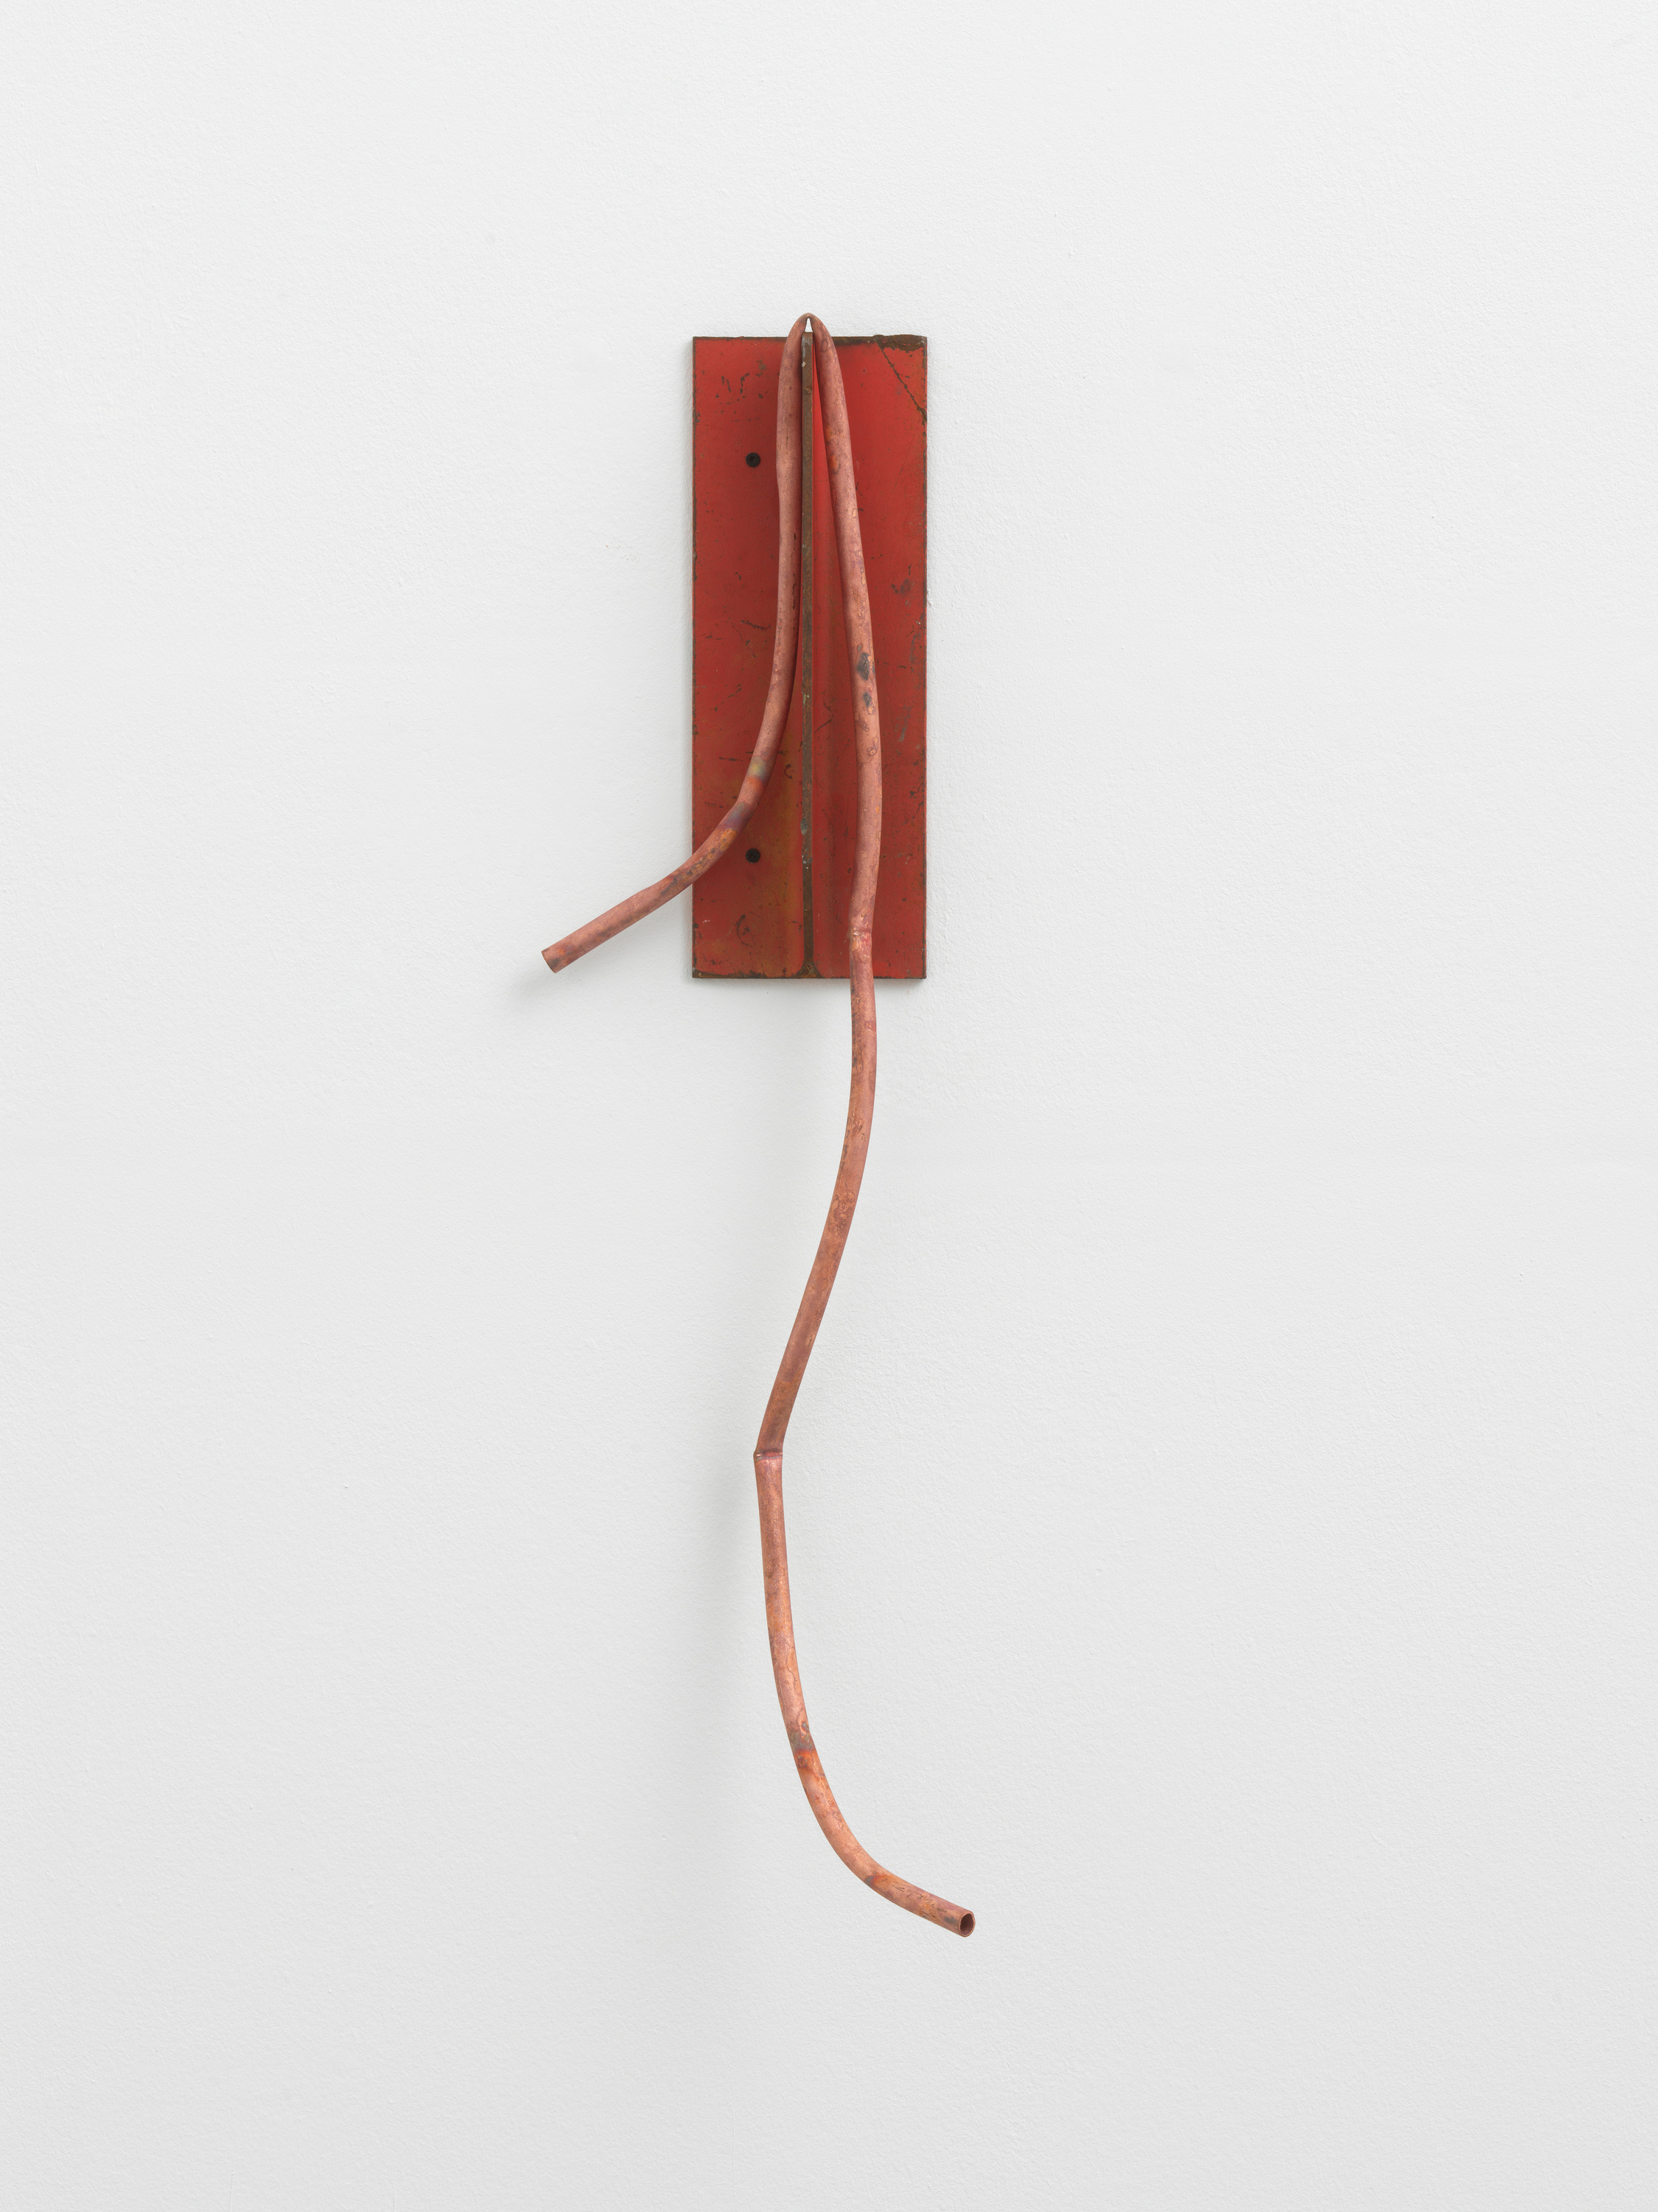 Galerie Barbara Thumm \ Sarah Entwistle: In all my life I have never been in such a need of a “blood-transfusion“ (SEn/S 57) \ In all my life I have never been in such a need of a “blood-transfusion” (2023)